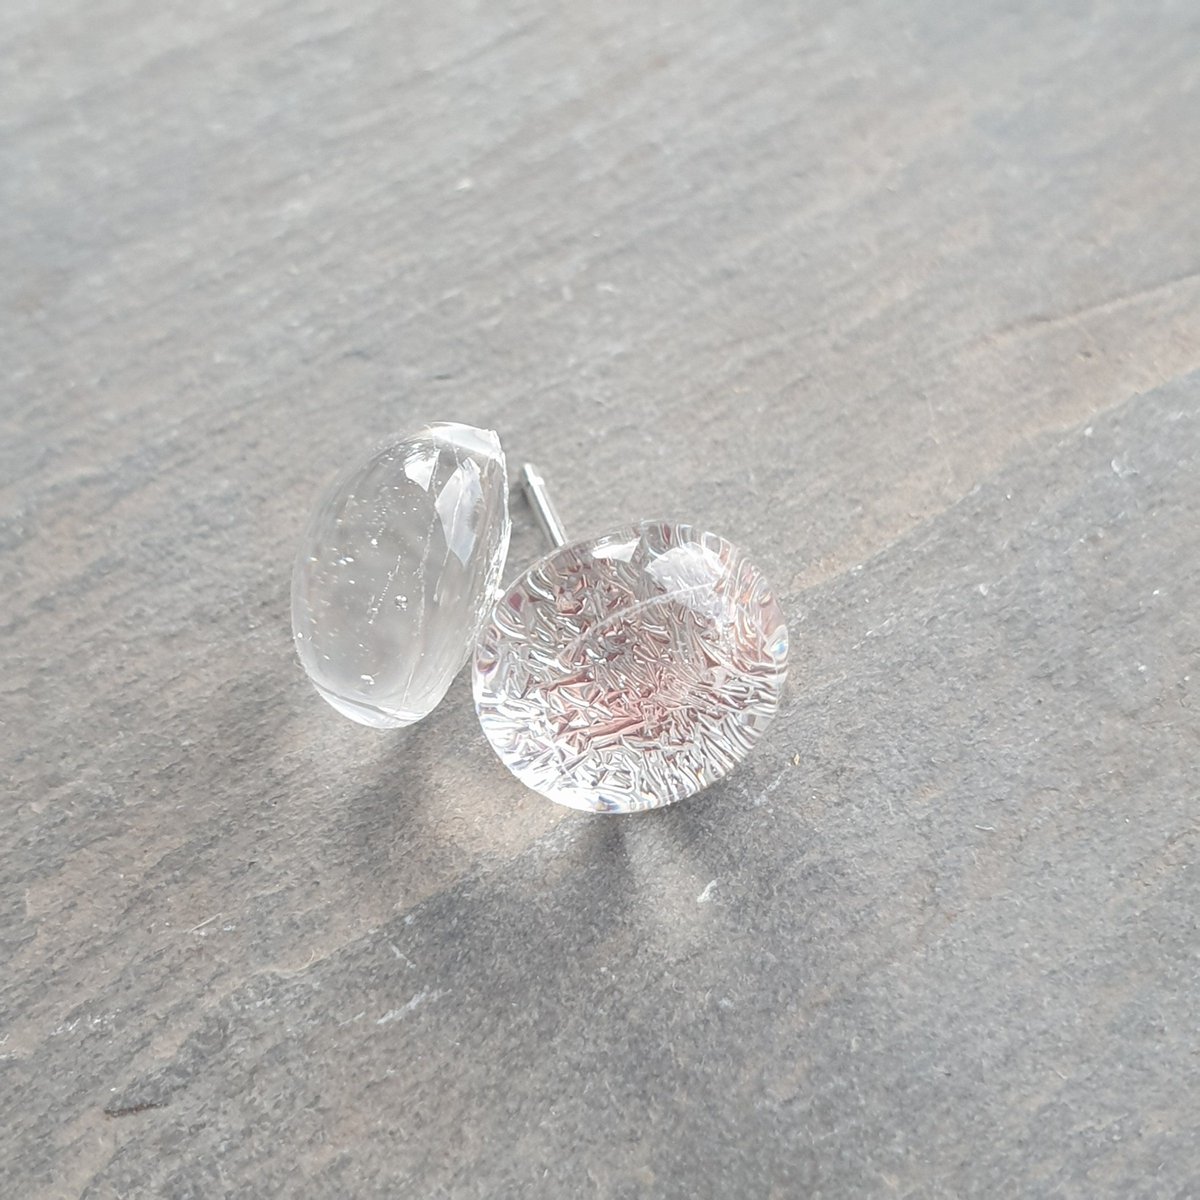 Amazing shimmering silver and pinks in these amazing handcrafted sterling silver and dichroic glass stud earrings. #giftideas #etsyuk #jewellery #handmade #etsy #shopindie buff.ly/46iuq6h